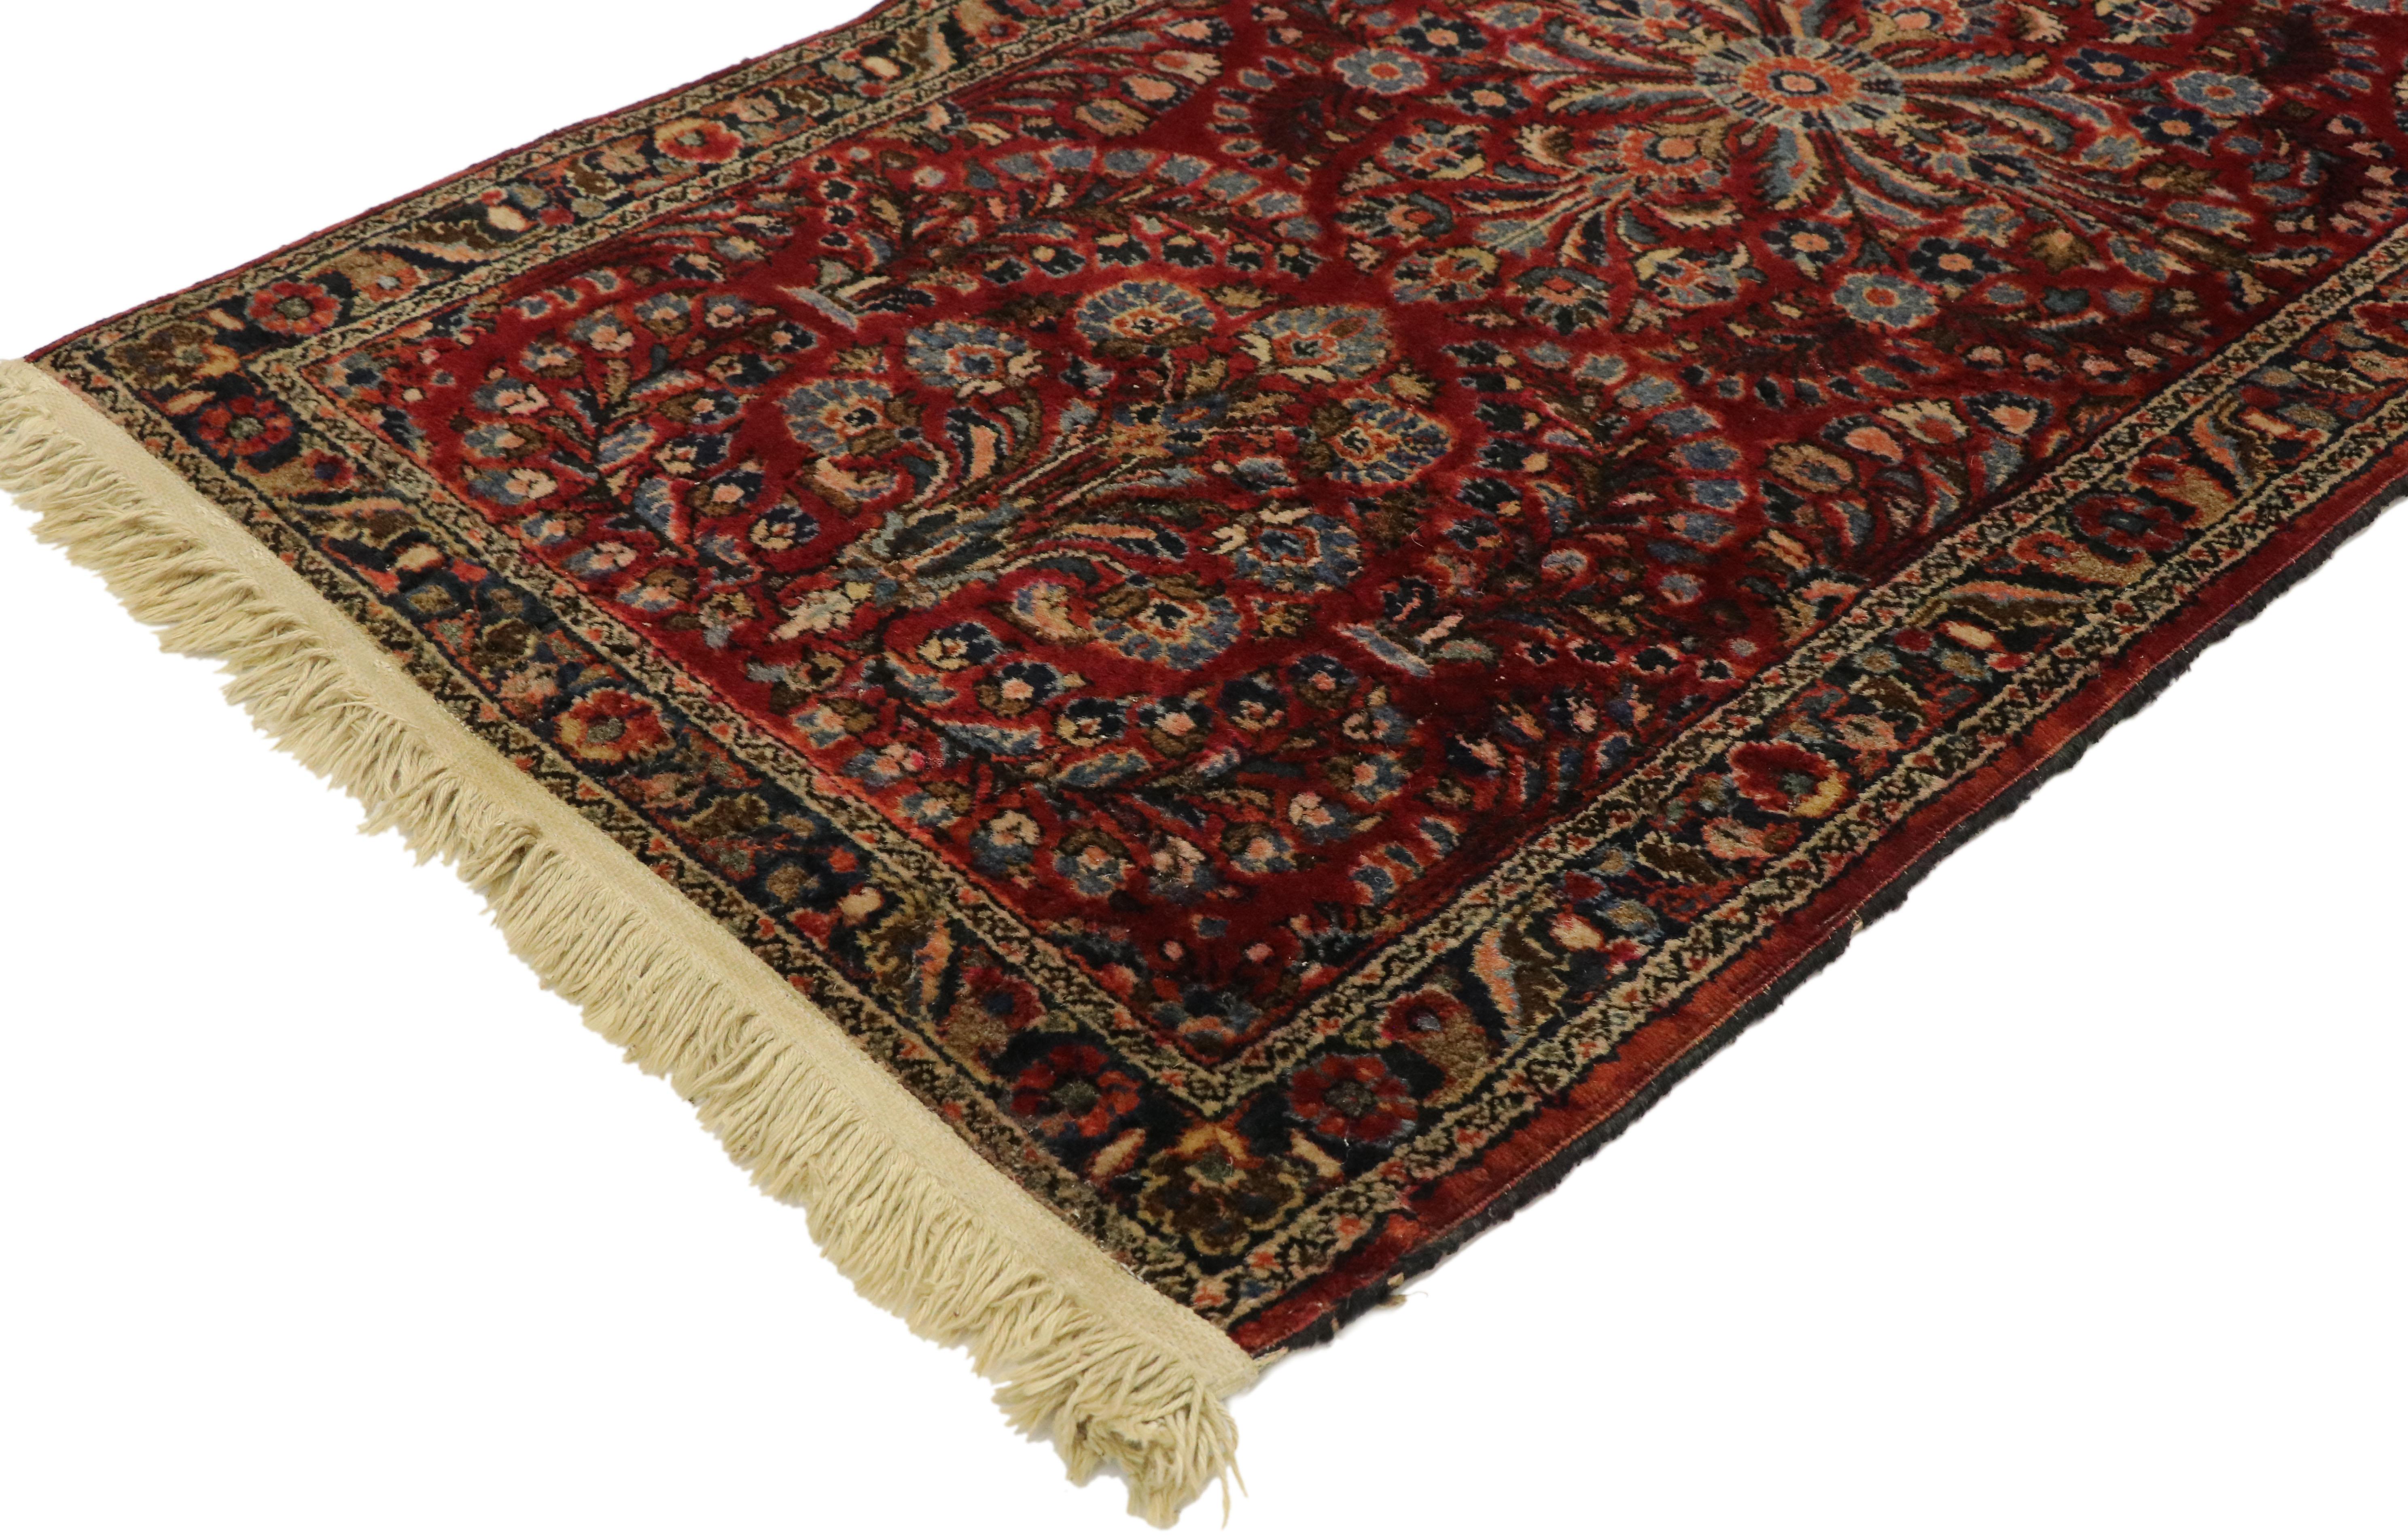 This highly desirable antique Persian Sarouk rug features an all-over floral with a refined palette illuminating its lively, composition. The charmingly all-over pattern of striking palmettes and botanical motifs embellished with serrated details